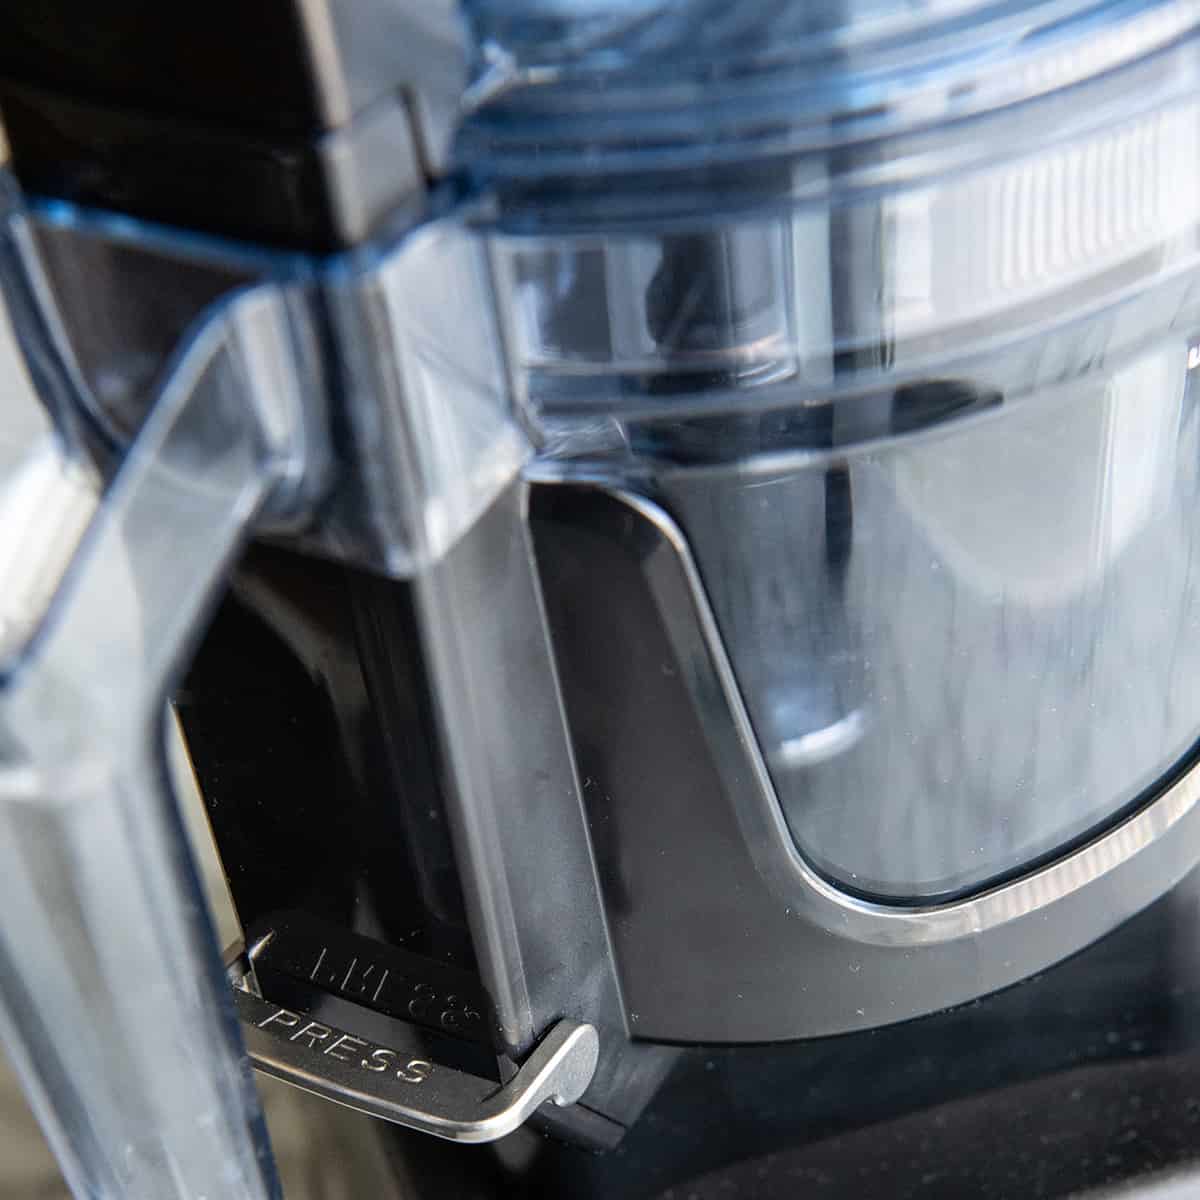 up close photo of the work bowl release button the Vitamix food processor attachment